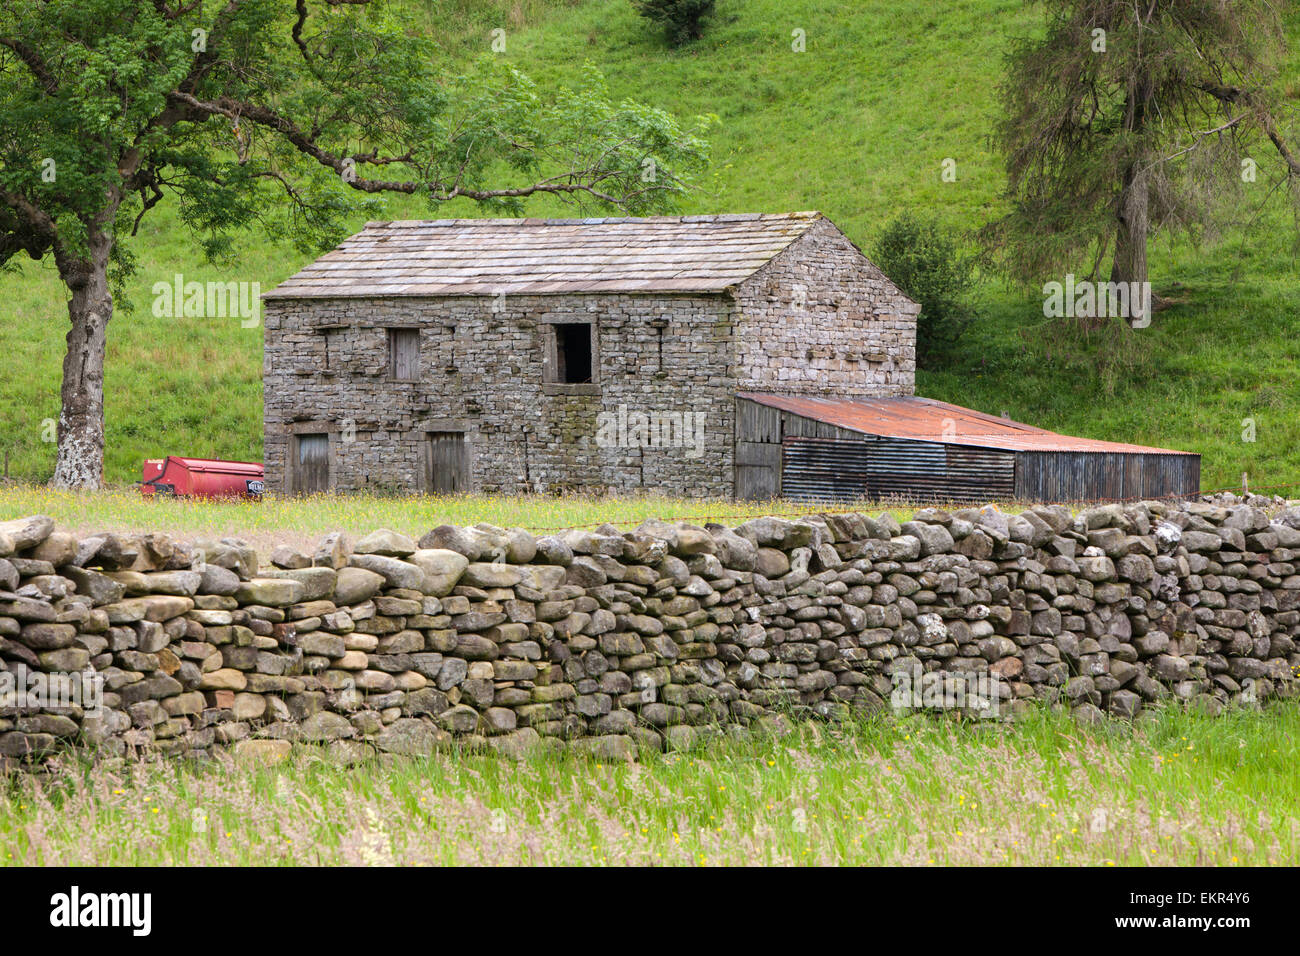 A Swaledale stone barn and drystone wall, Swaledale, Yorkshire Dales National Park, North Yorkshire, England, UK Stock Photo